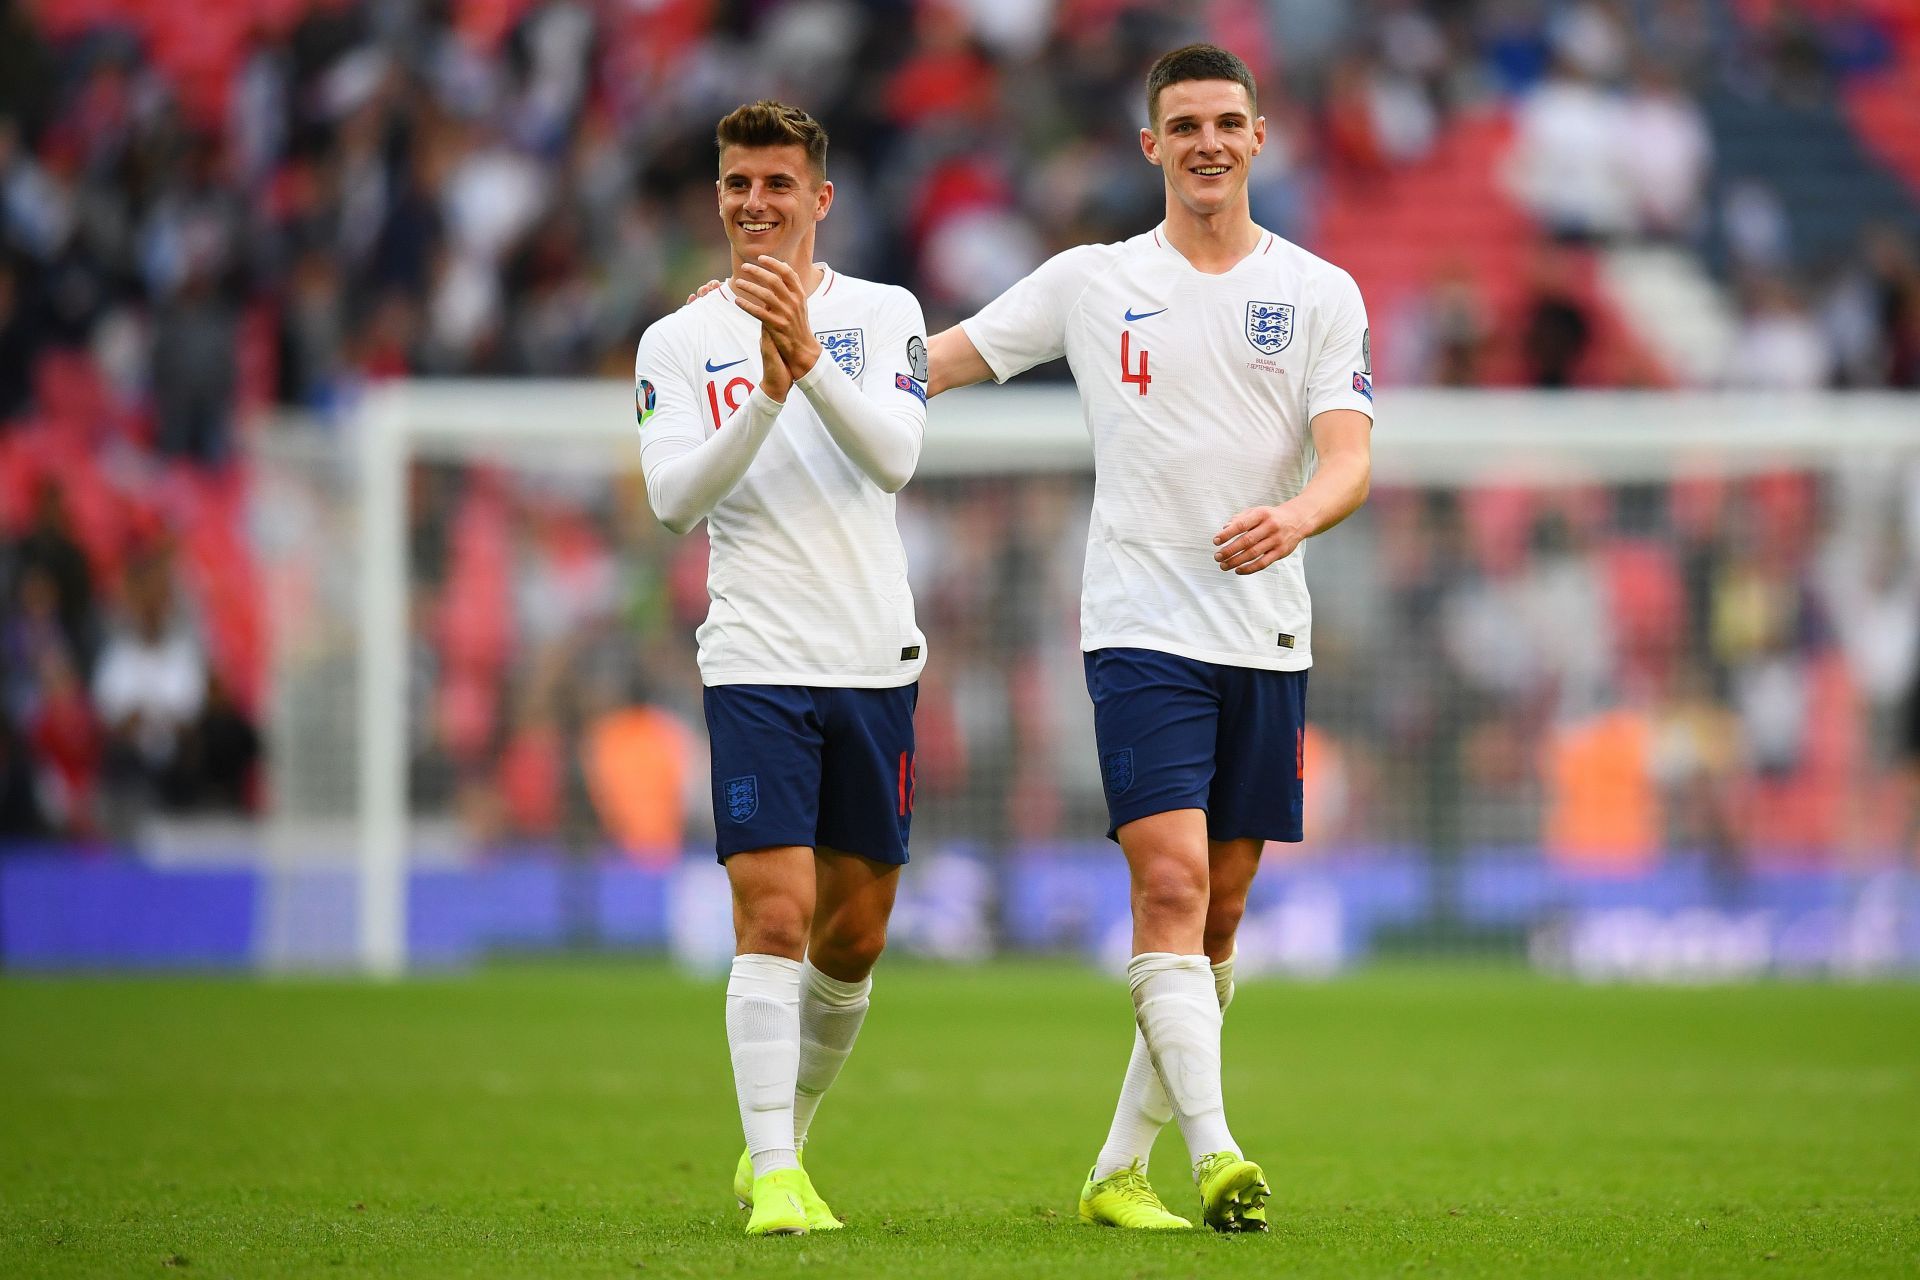 Mason Mount could be instrumental in any move Declan Rice makes this summer